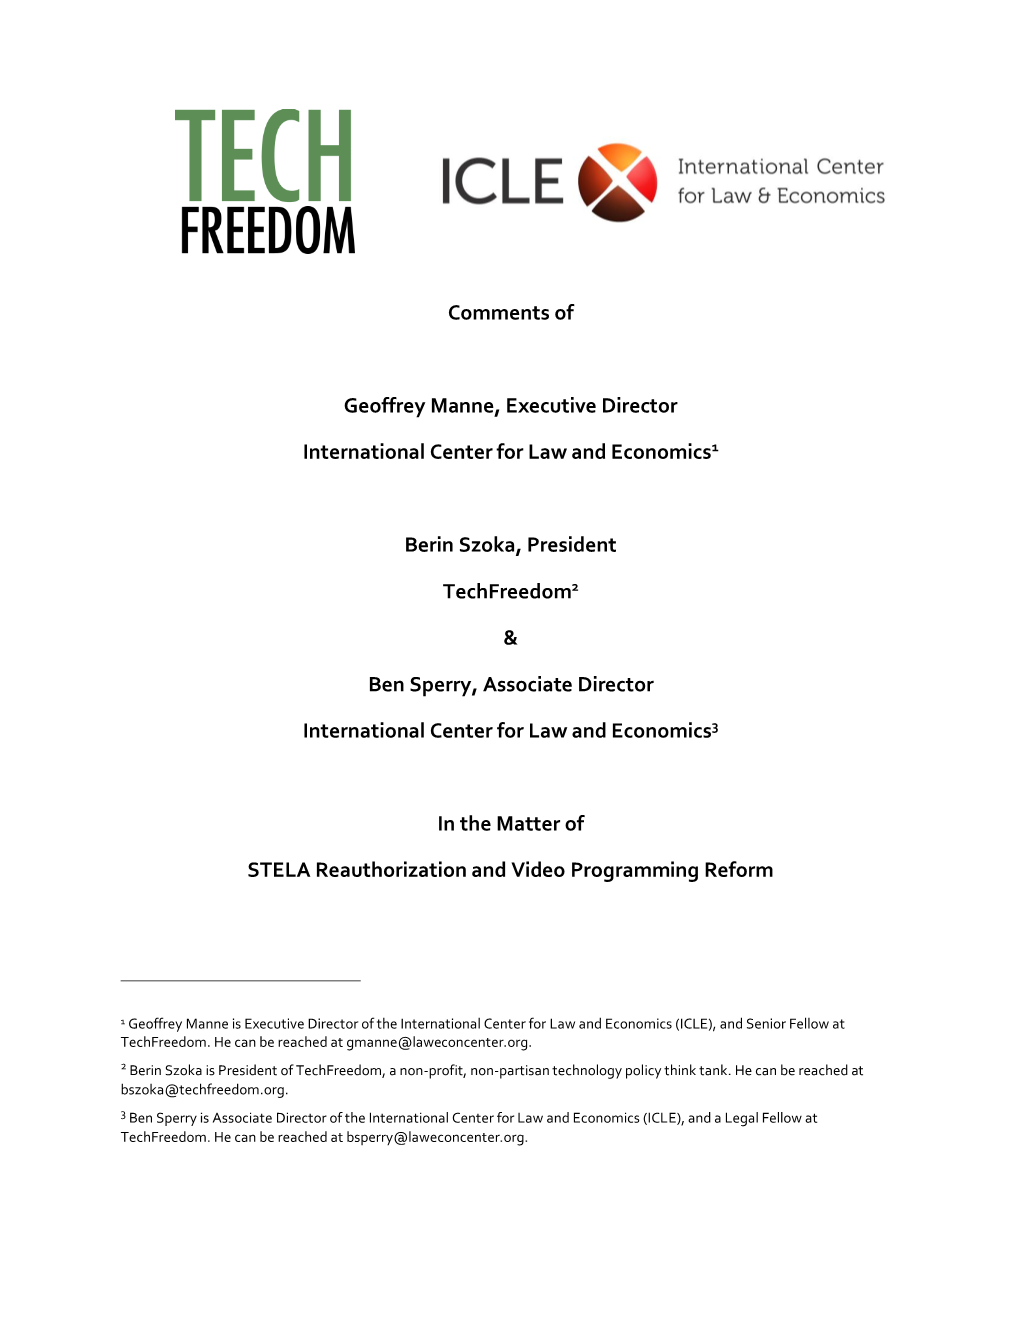 Comments of Geoffrey Manne, Executive Director International Center for Law and Economics1 Berin Szoka, President Techfreedom2 &